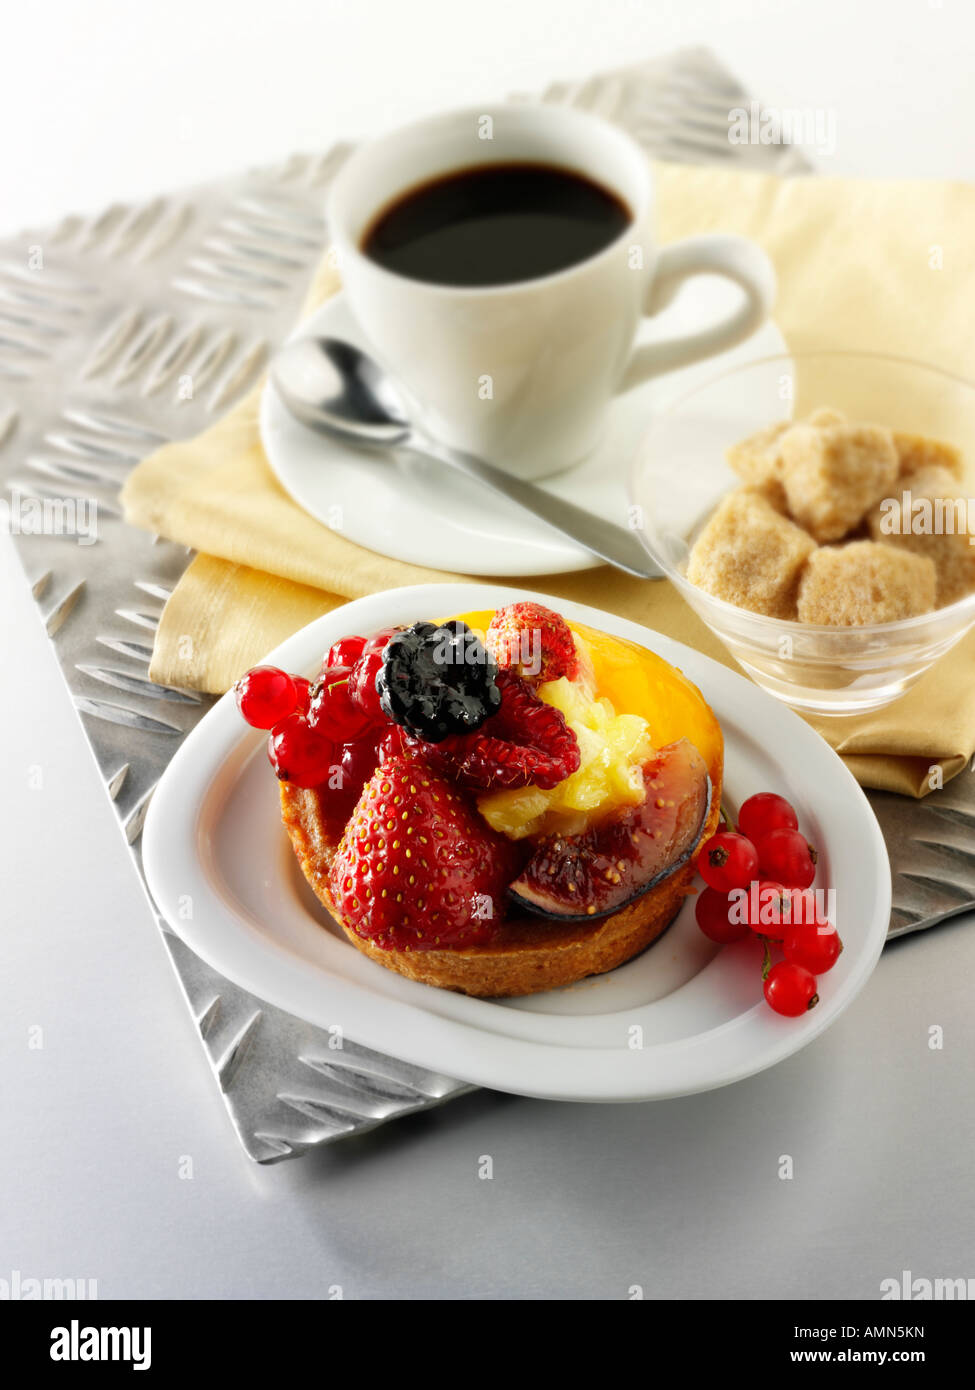 espresso coffee, with red currants and wild strawberry custard tart pastry in a cafe setting with coffee cup Stock Photo